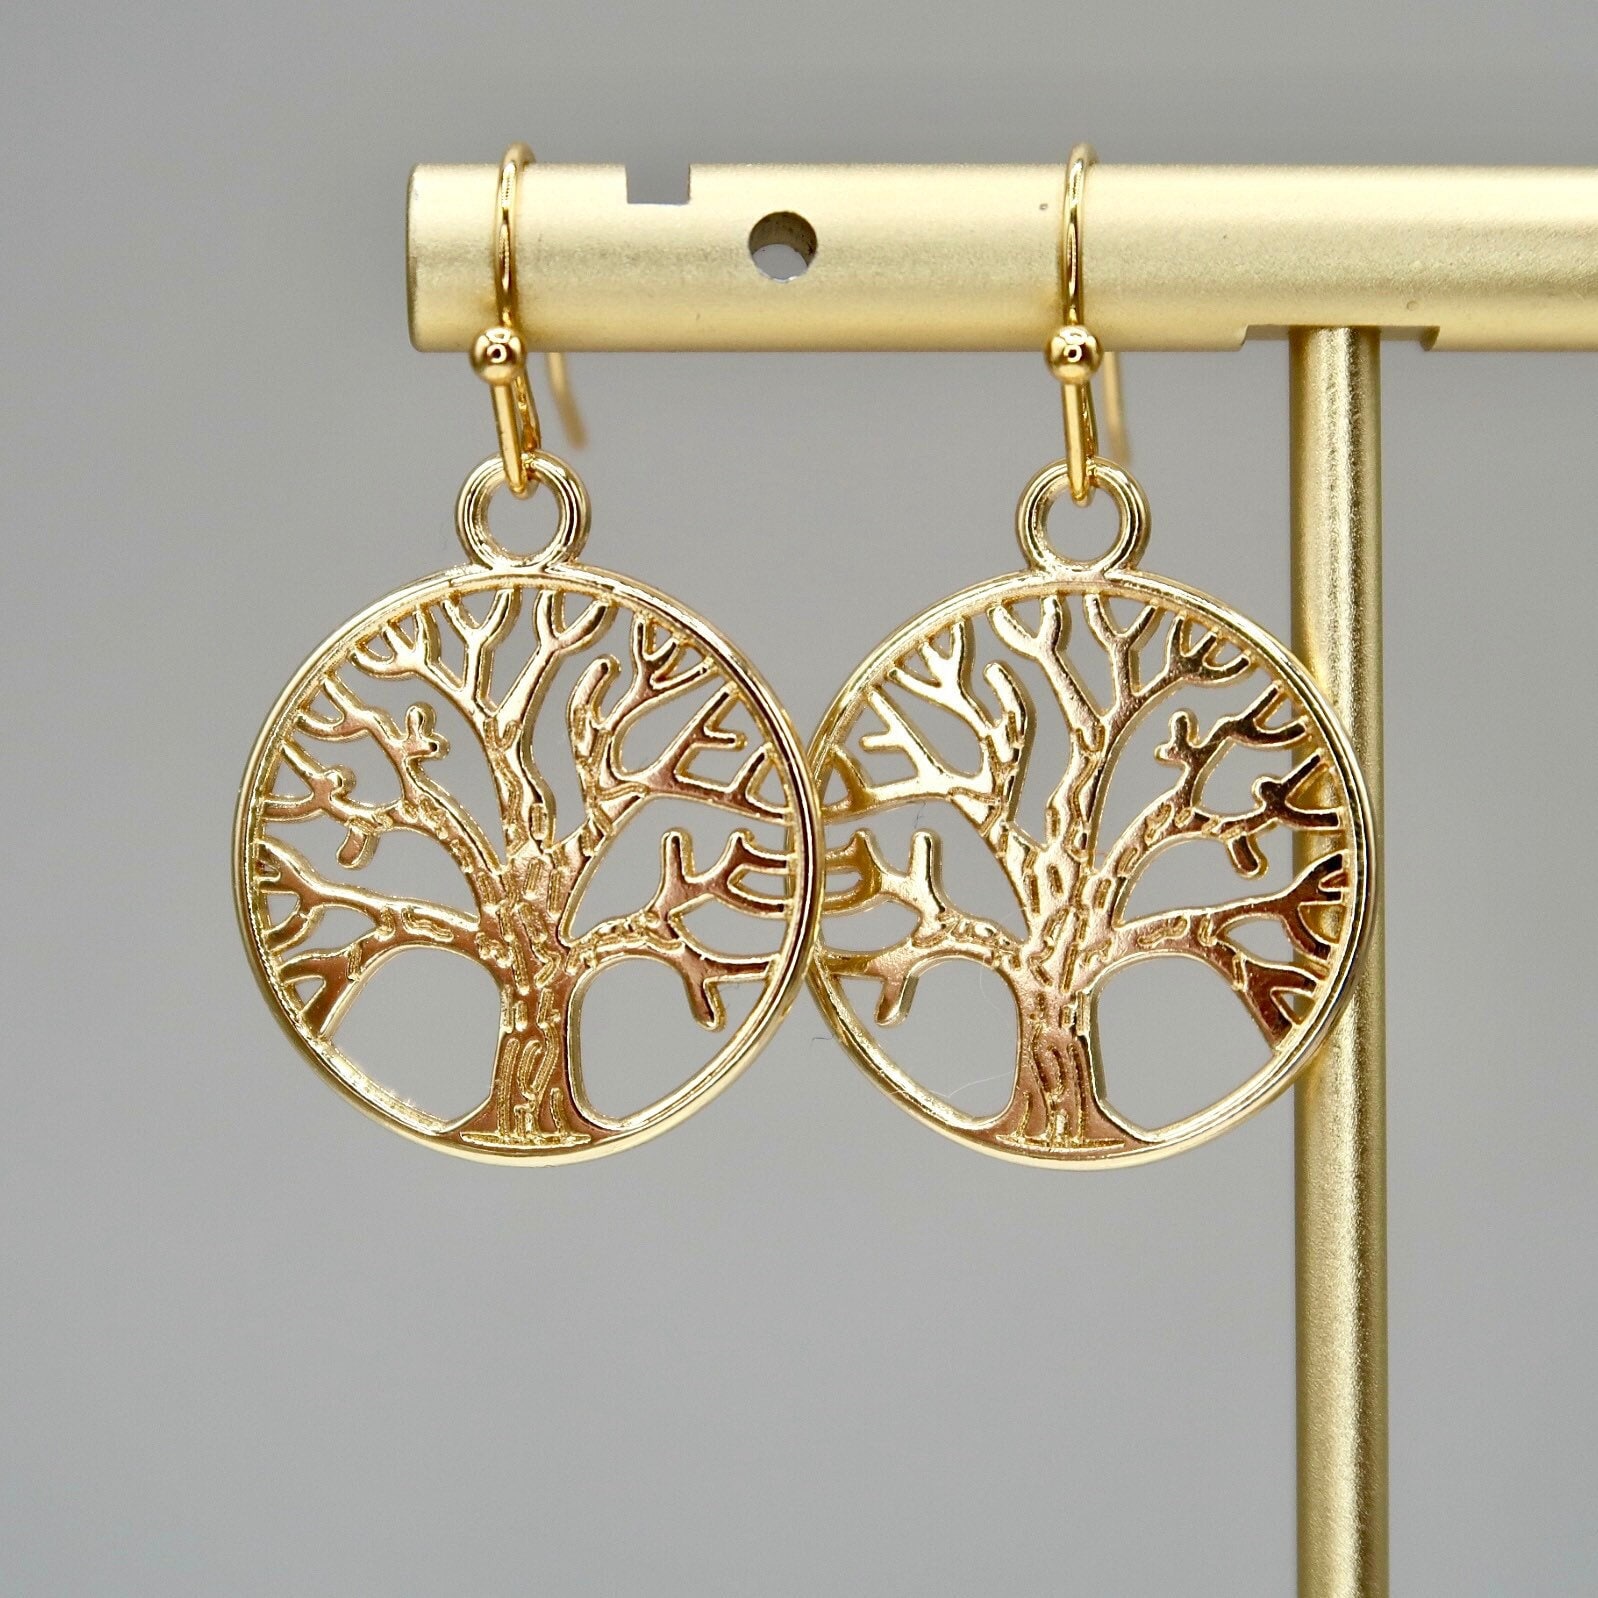 Birch Tree Red Bird Customized Earring Display Cards Personalized